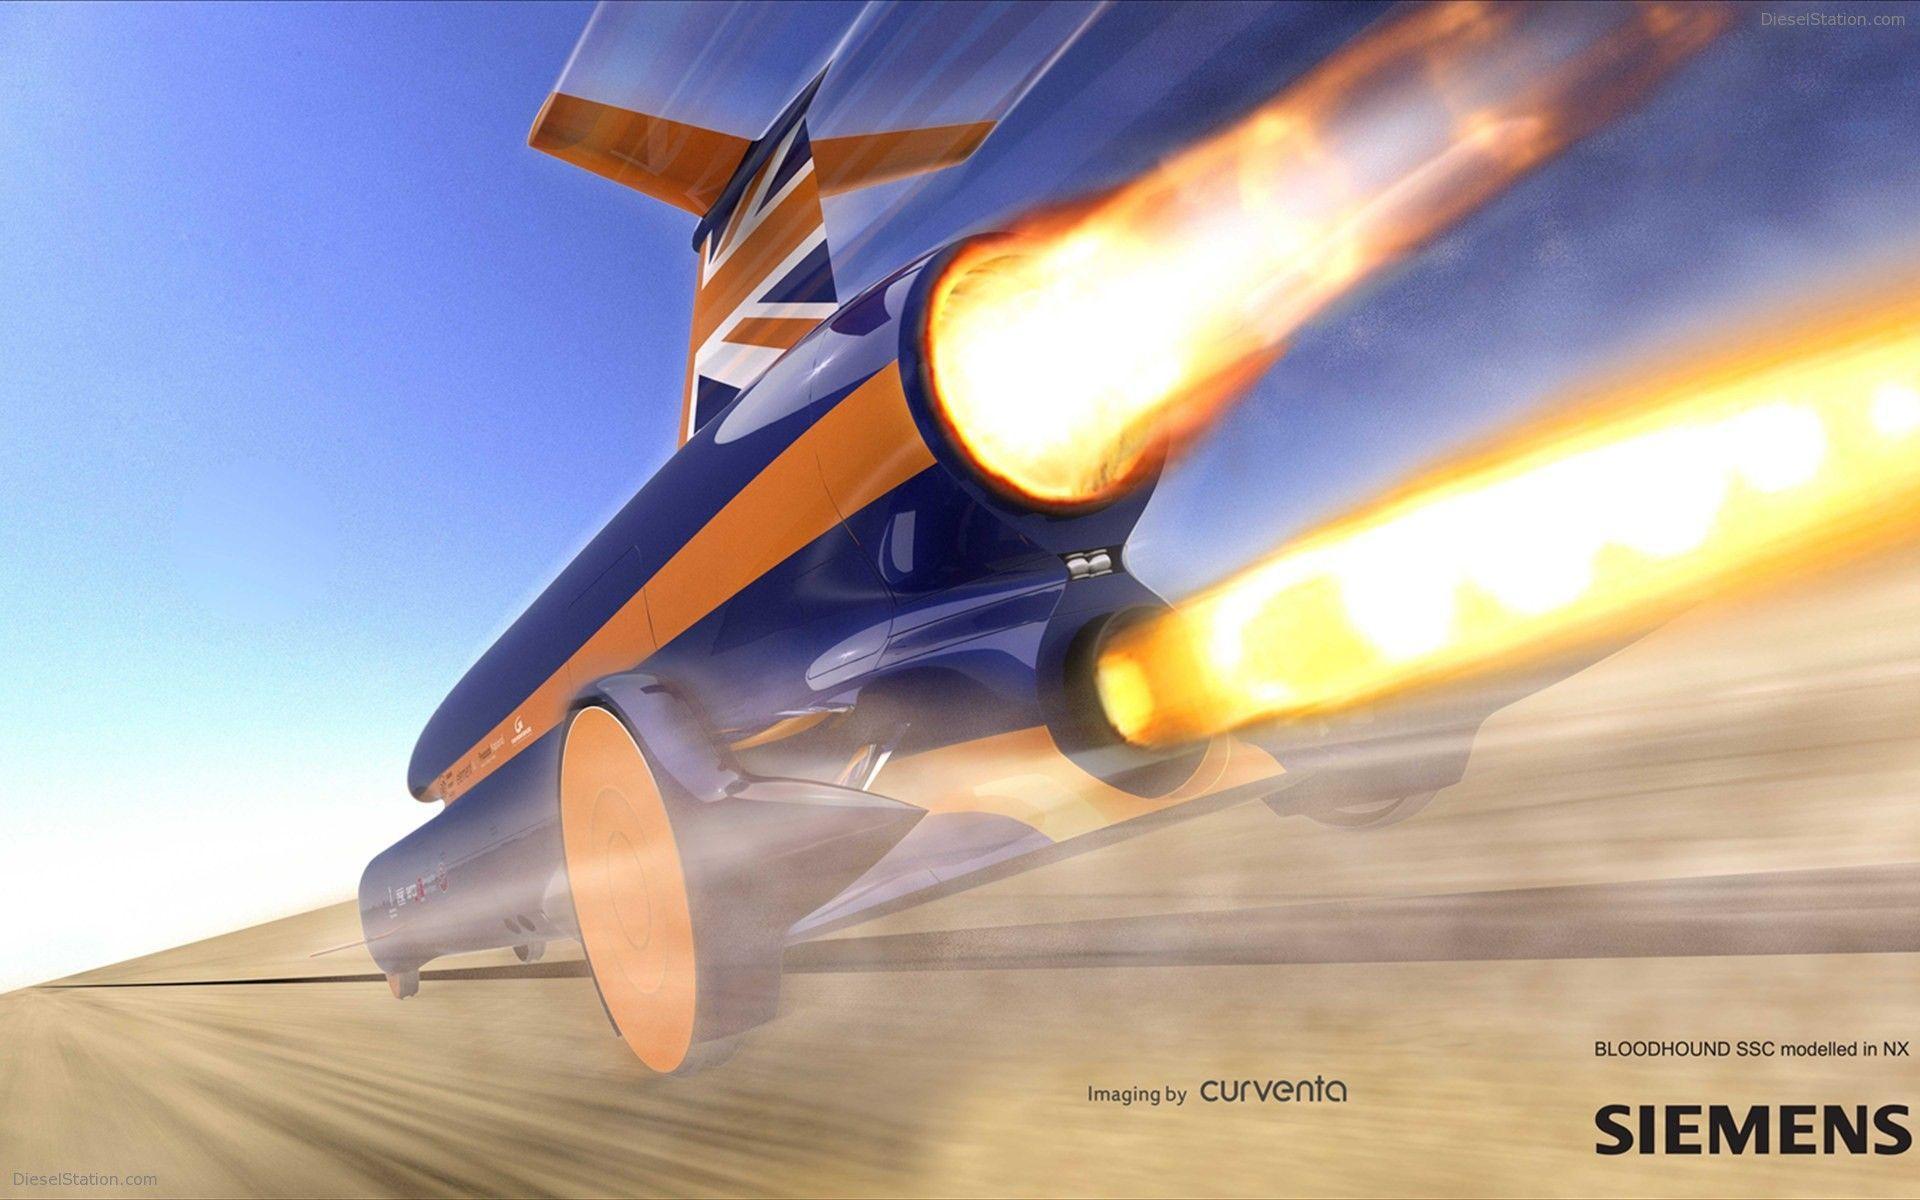 Bloodhound SSC Project Widescreen Exotic Car Wallpaper of 32